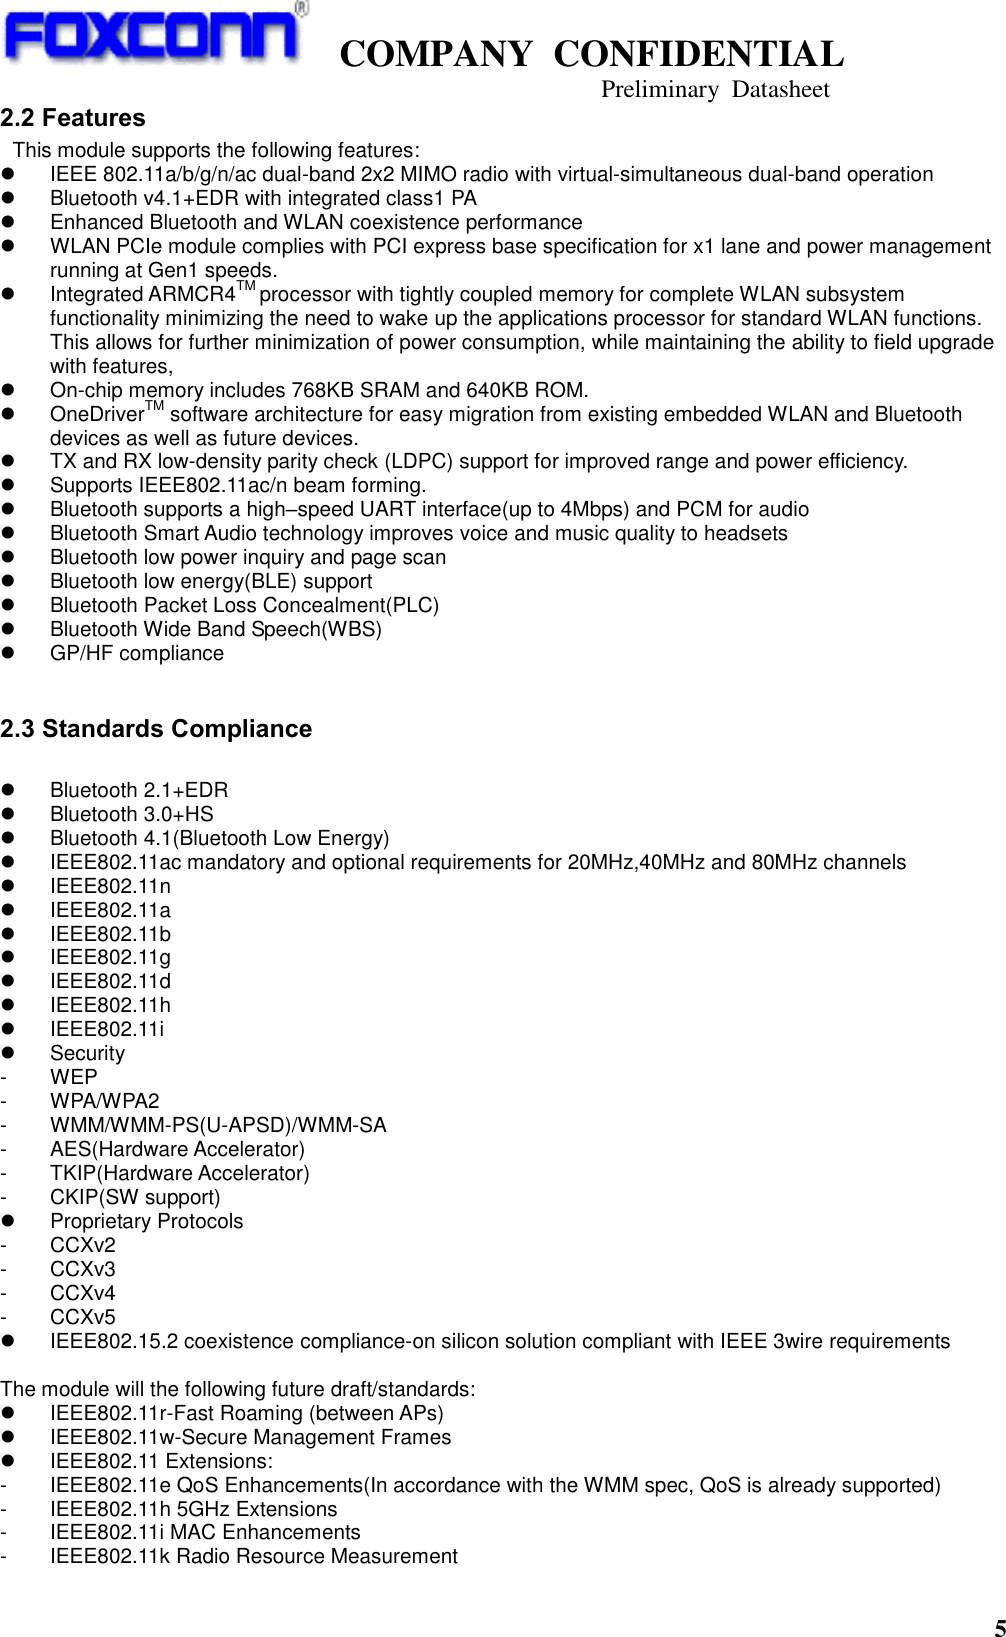   COMPANY  CONFIDENTIAL                                   Preliminary  Datasheet 5  2.2 Features  This module supports the following features:   IEEE 802.11a/b/g/n/ac dual-band 2x2 MIMO radio with virtual-simultaneous dual-band operation   Bluetooth v4.1+EDR with integrated class1 PA   Enhanced Bluetooth and WLAN coexistence performance   WLAN PCIe module complies with PCI express base specification for x1 lane and power management running at Gen1 speeds.     Integrated ARMCR4TM processor with tightly coupled memory for complete WLAN subsystem functionality minimizing the need to wake up the applications processor for standard WLAN functions. This allows for further minimization of power consumption, while maintaining the ability to field upgrade with features,  On-chip memory includes 768KB SRAM and 640KB ROM.   OneDriverTM software architecture for easy migration from existing embedded WLAN and Bluetooth devices as well as future devices.   TX and RX low-density parity check (LDPC) support for improved range and power efficiency.   Supports IEEE802.11ac/n beam forming.   Bluetooth supports a high–speed UART interface(up to 4Mbps) and PCM for audio   Bluetooth Smart Audio technology improves voice and music quality to headsets   Bluetooth low power inquiry and page scan   Bluetooth low energy(BLE) support   Bluetooth Packet Loss Concealment(PLC)   Bluetooth Wide Band Speech(WBS)   GP/HF compliance  2.3 Standards Compliance    Bluetooth 2.1+EDR   Bluetooth 3.0+HS   Bluetooth 4.1(Bluetooth Low Energy)   IEEE802.11ac mandatory and optional requirements for 20MHz,40MHz and 80MHz channels   IEEE802.11n   IEEE802.11a   IEEE802.11b   IEEE802.11g   IEEE802.11d   IEEE802.11h   IEEE802.11i   Security -  WEP -  WPA/WPA2 -  WMM/WMM-PS(U-APSD)/WMM-SA -  AES(Hardware Accelerator) -  TKIP(Hardware Accelerator) -  CKIP(SW support)   Proprietary Protocols -  CCXv2 -  CCXv3 -  CCXv4 -  CCXv5   IEEE802.15.2 coexistence compliance-on silicon solution compliant with IEEE 3wire requirements  The module will the following future draft/standards:   IEEE802.11r-Fast Roaming (between APs)   IEEE802.11w-Secure Management Frames   IEEE802.11 Extensions: -  IEEE802.11e QoS Enhancements(In accordance with the WMM spec, QoS is already supported) -  IEEE802.11h 5GHz Extensions -  IEEE802.11i MAC Enhancements -  IEEE802.11k Radio Resource Measurement 